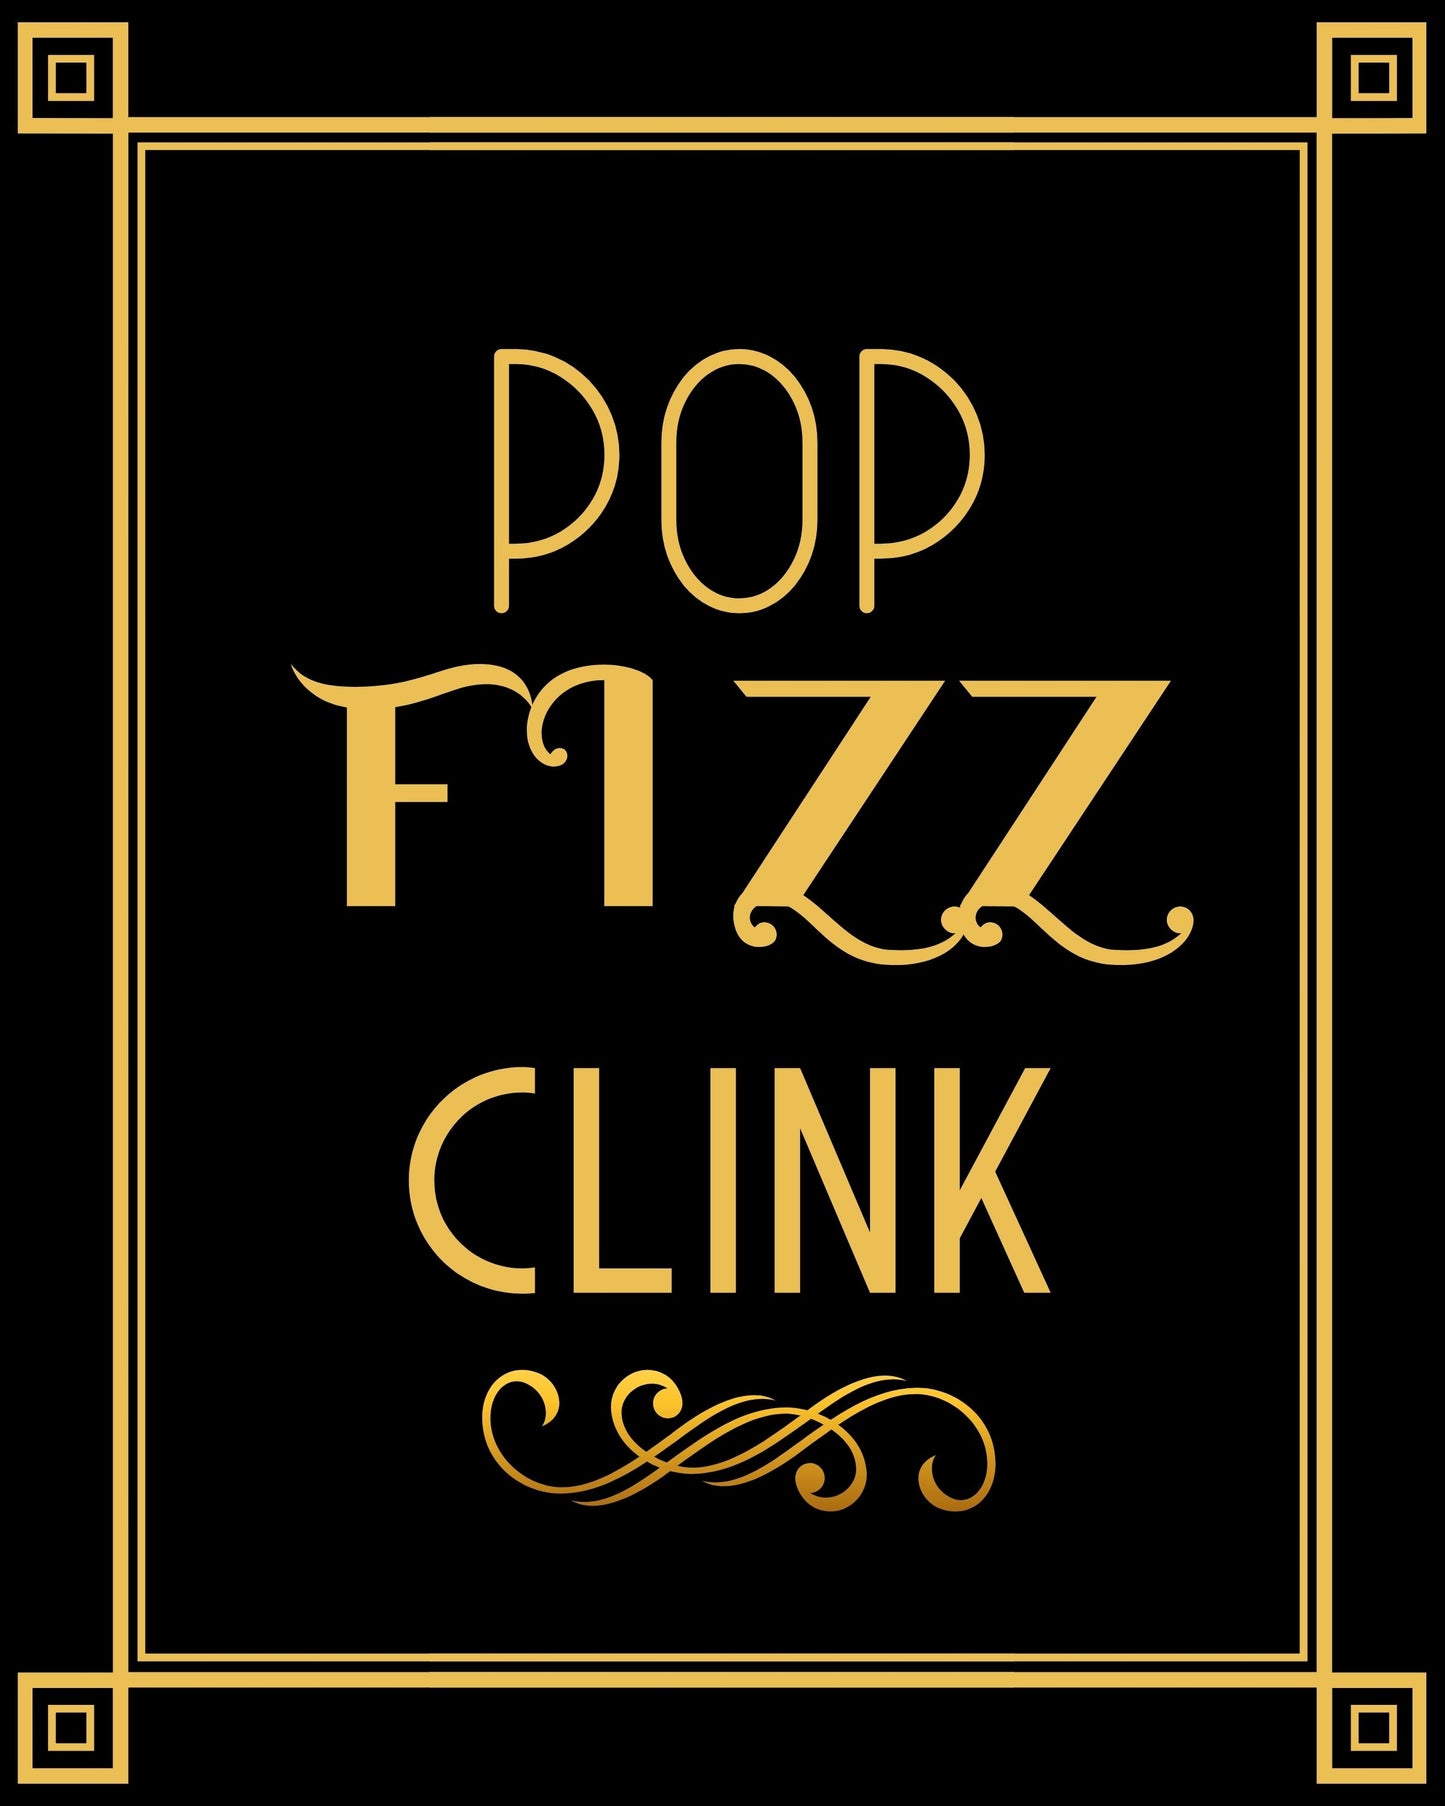 "Pop Fizz Clink" Printable Party Sign For Great Gatsby or Roaring 20's Party Or Wedding, Black & Gold, Printable Party Decor